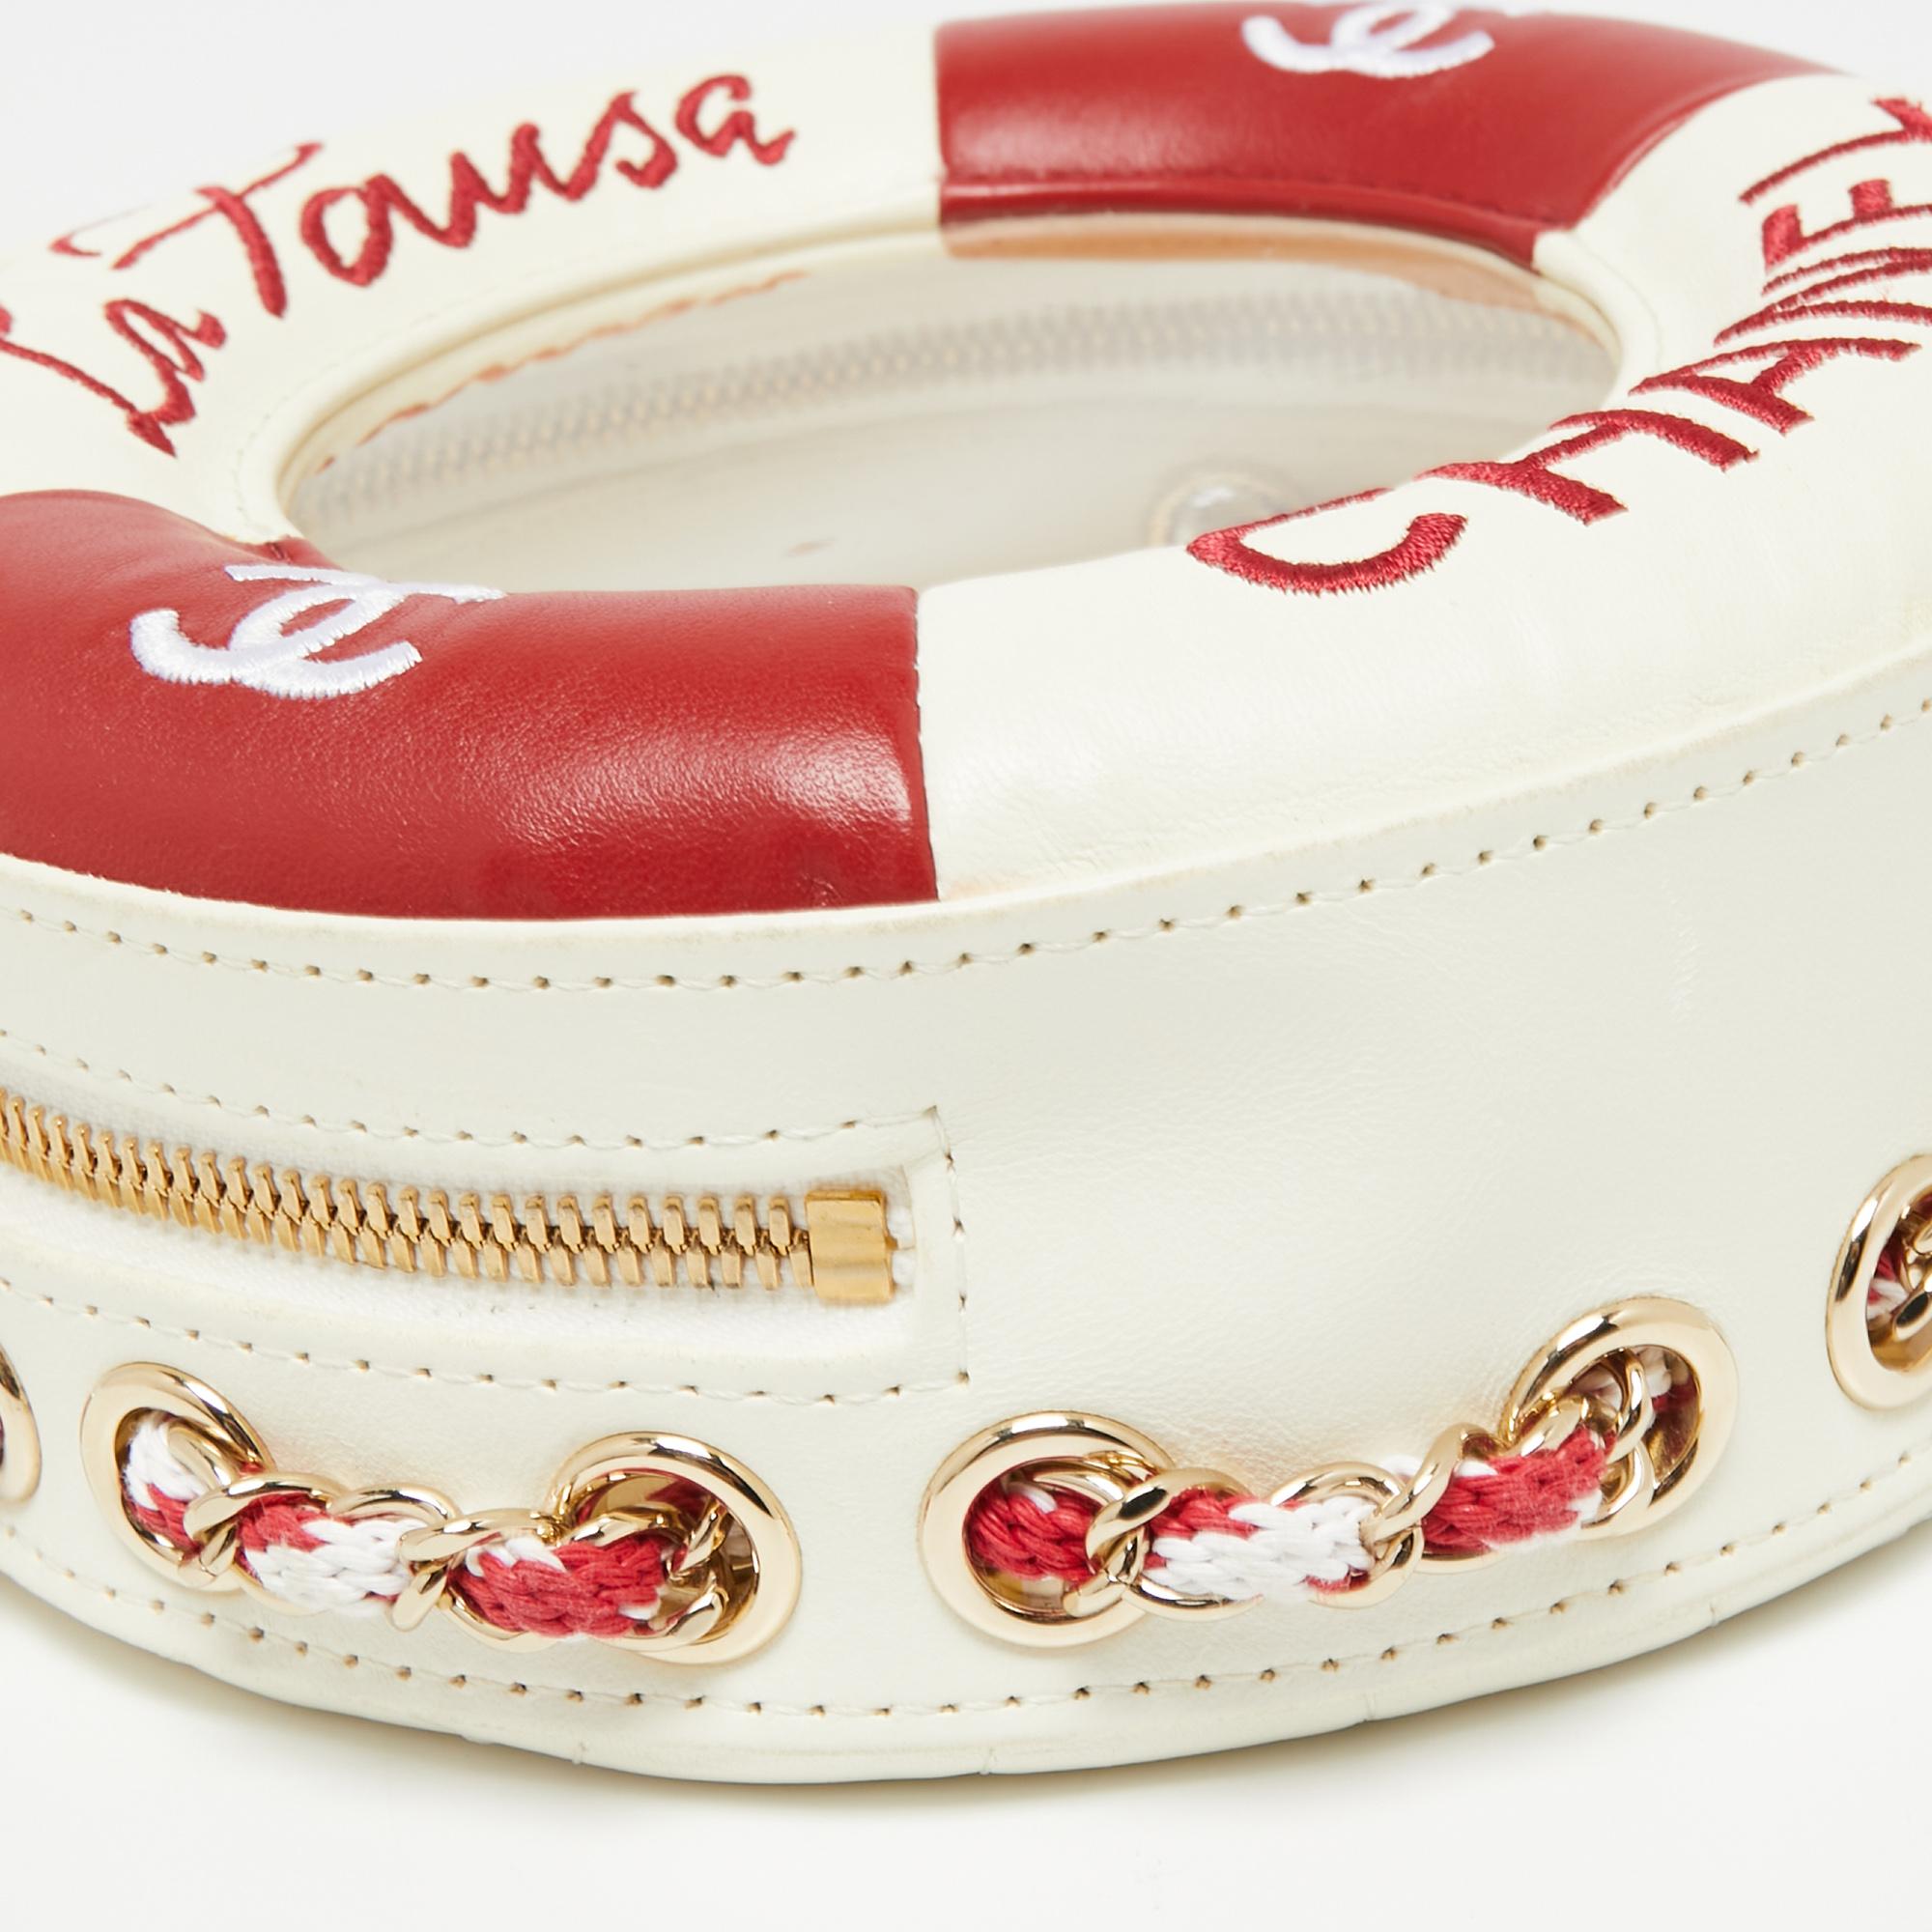 Chanel Red/White Leather Coco Lifesaver Round Bag 1